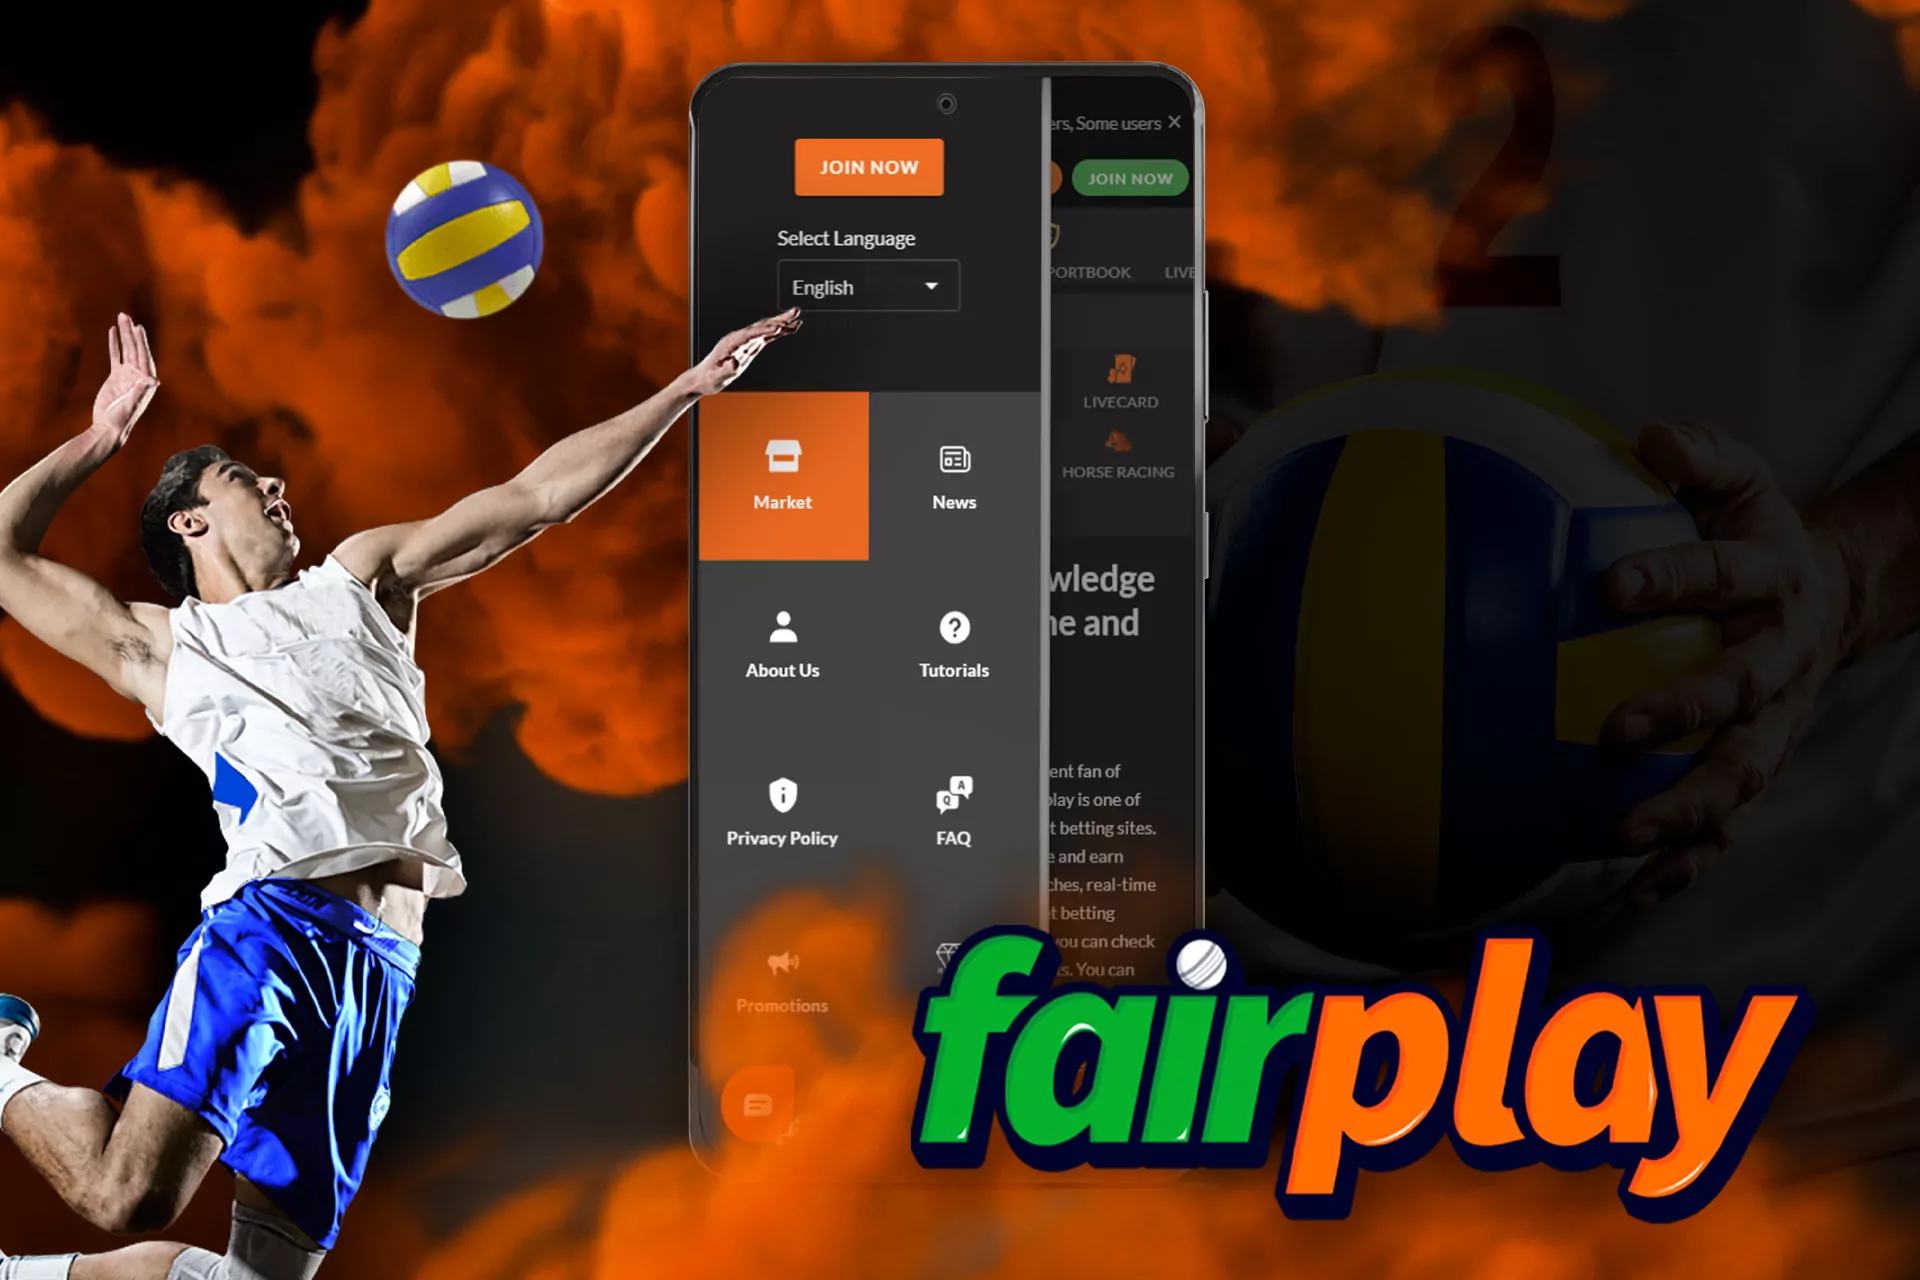 In the Fairplay app, many users place bets on volleyball among others sports disciplines.